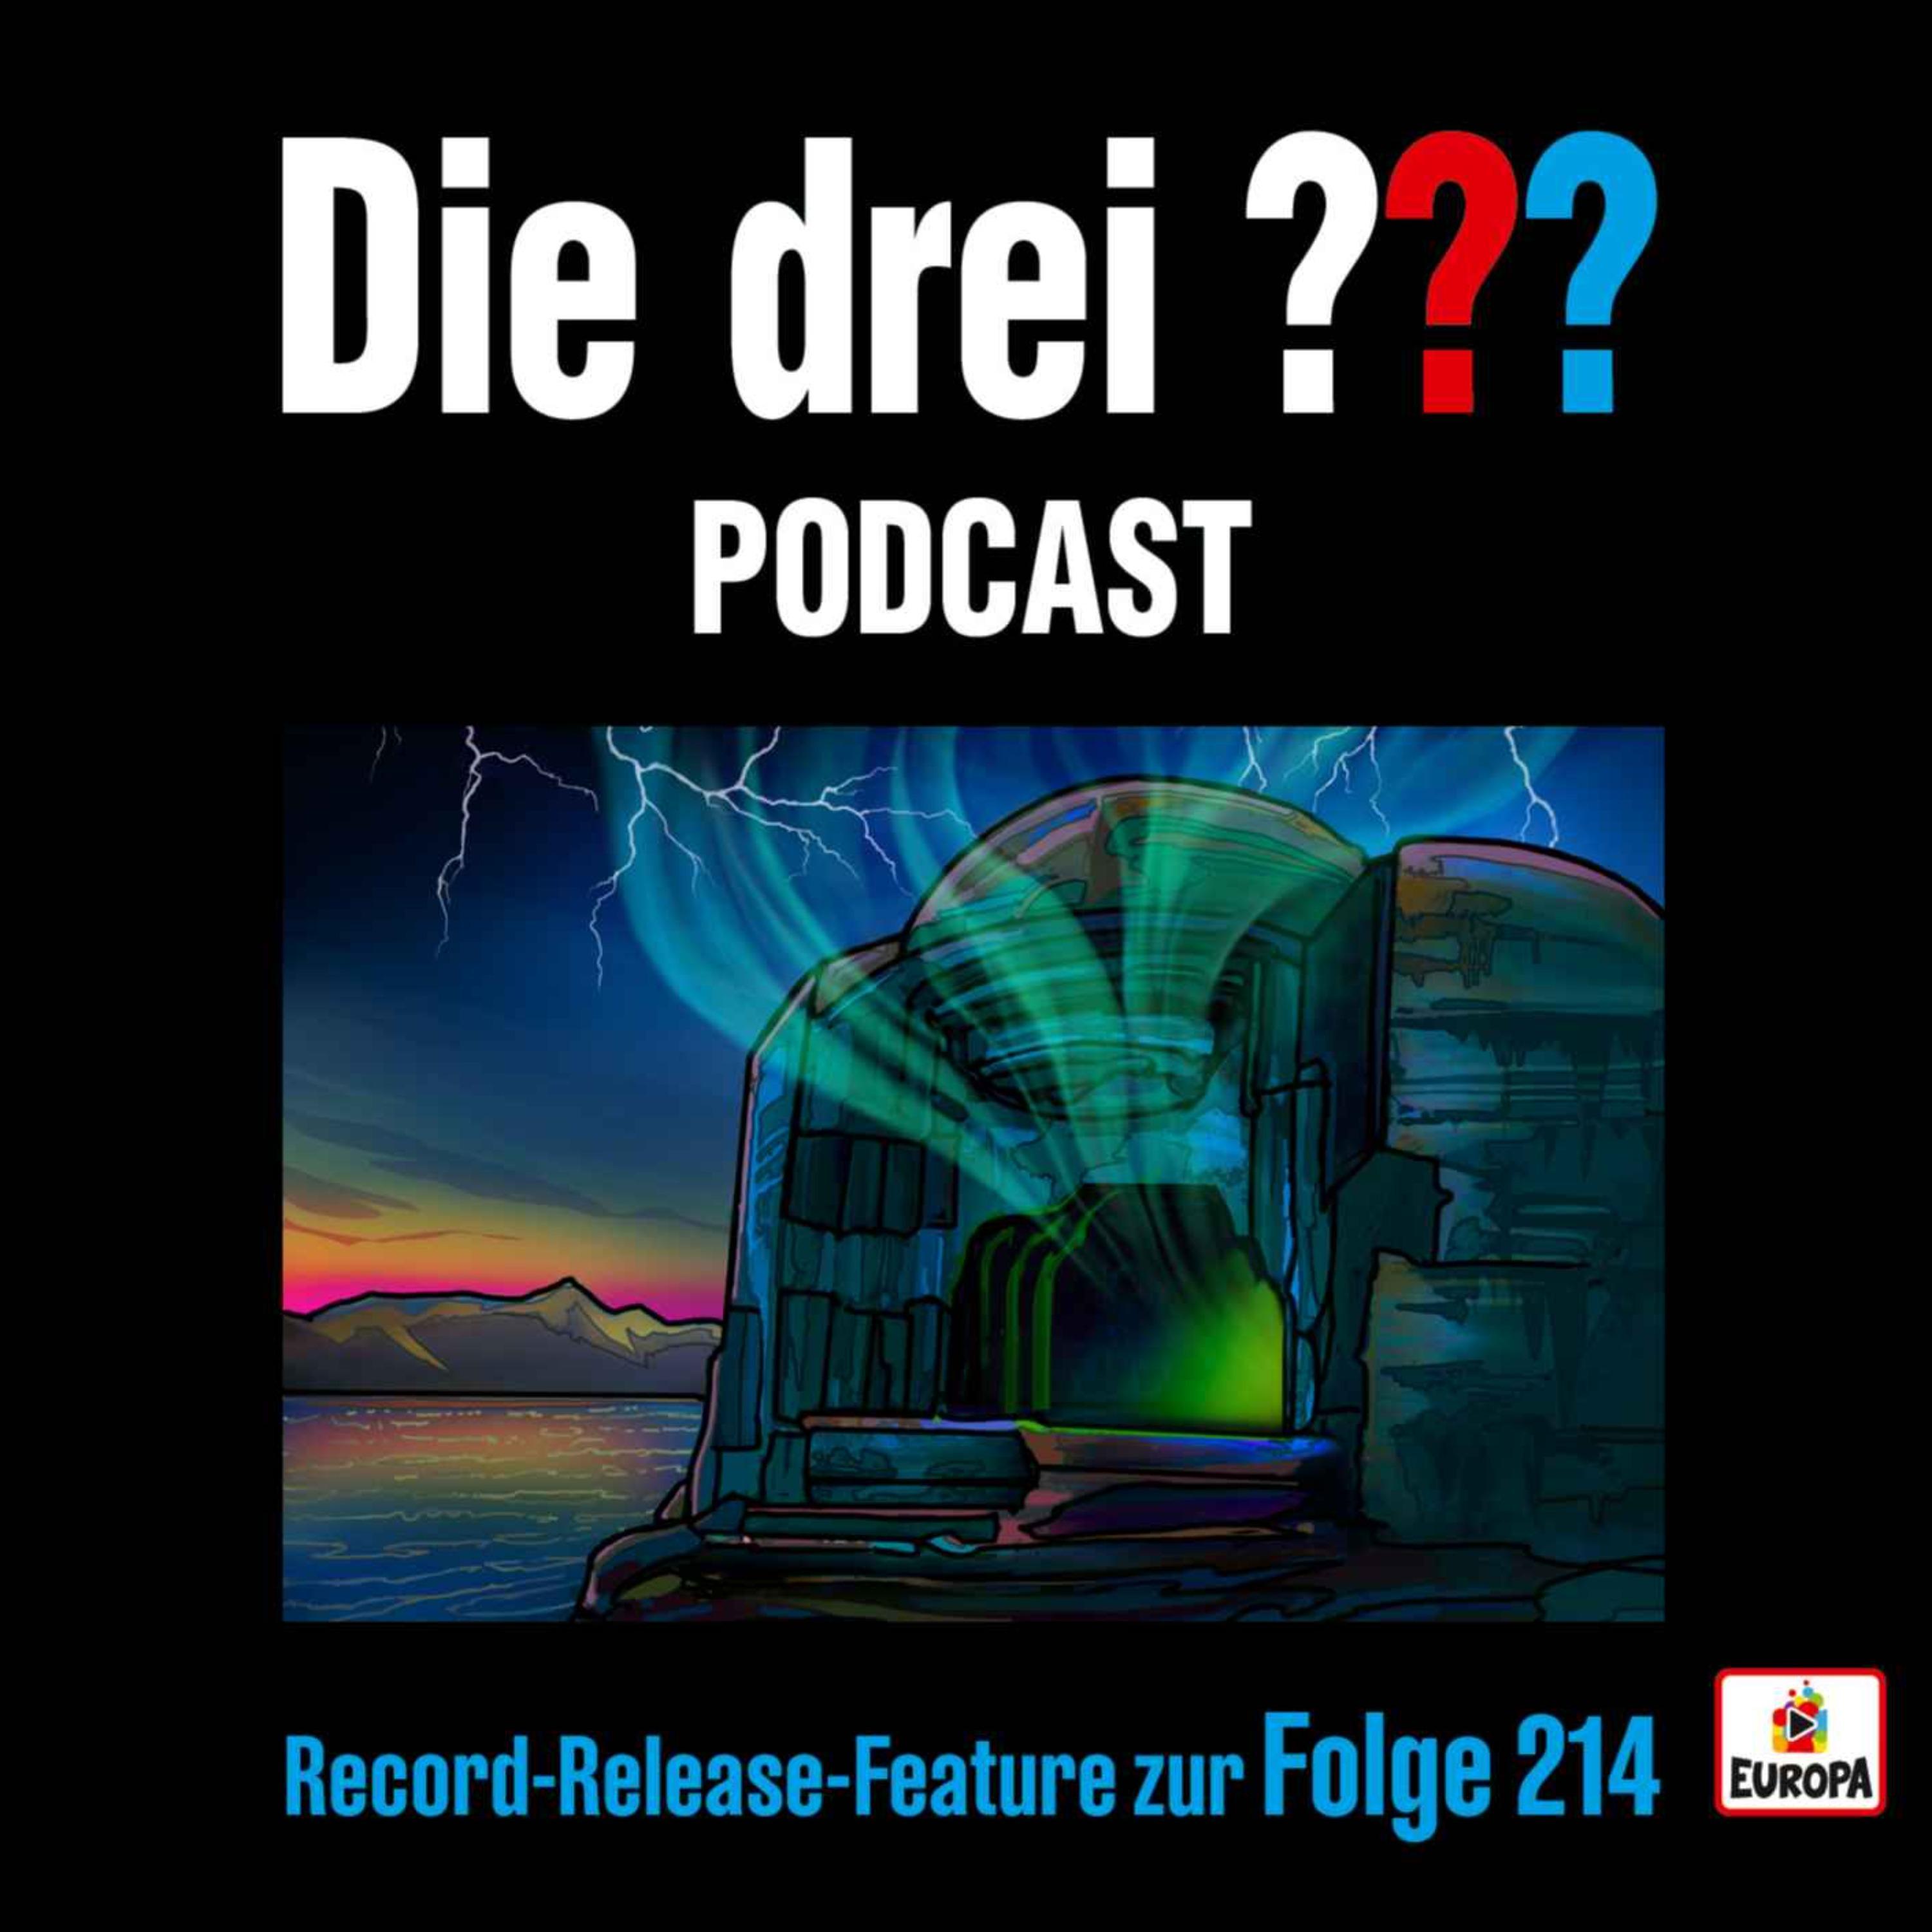 Record-Release-Feature zur Folge 214